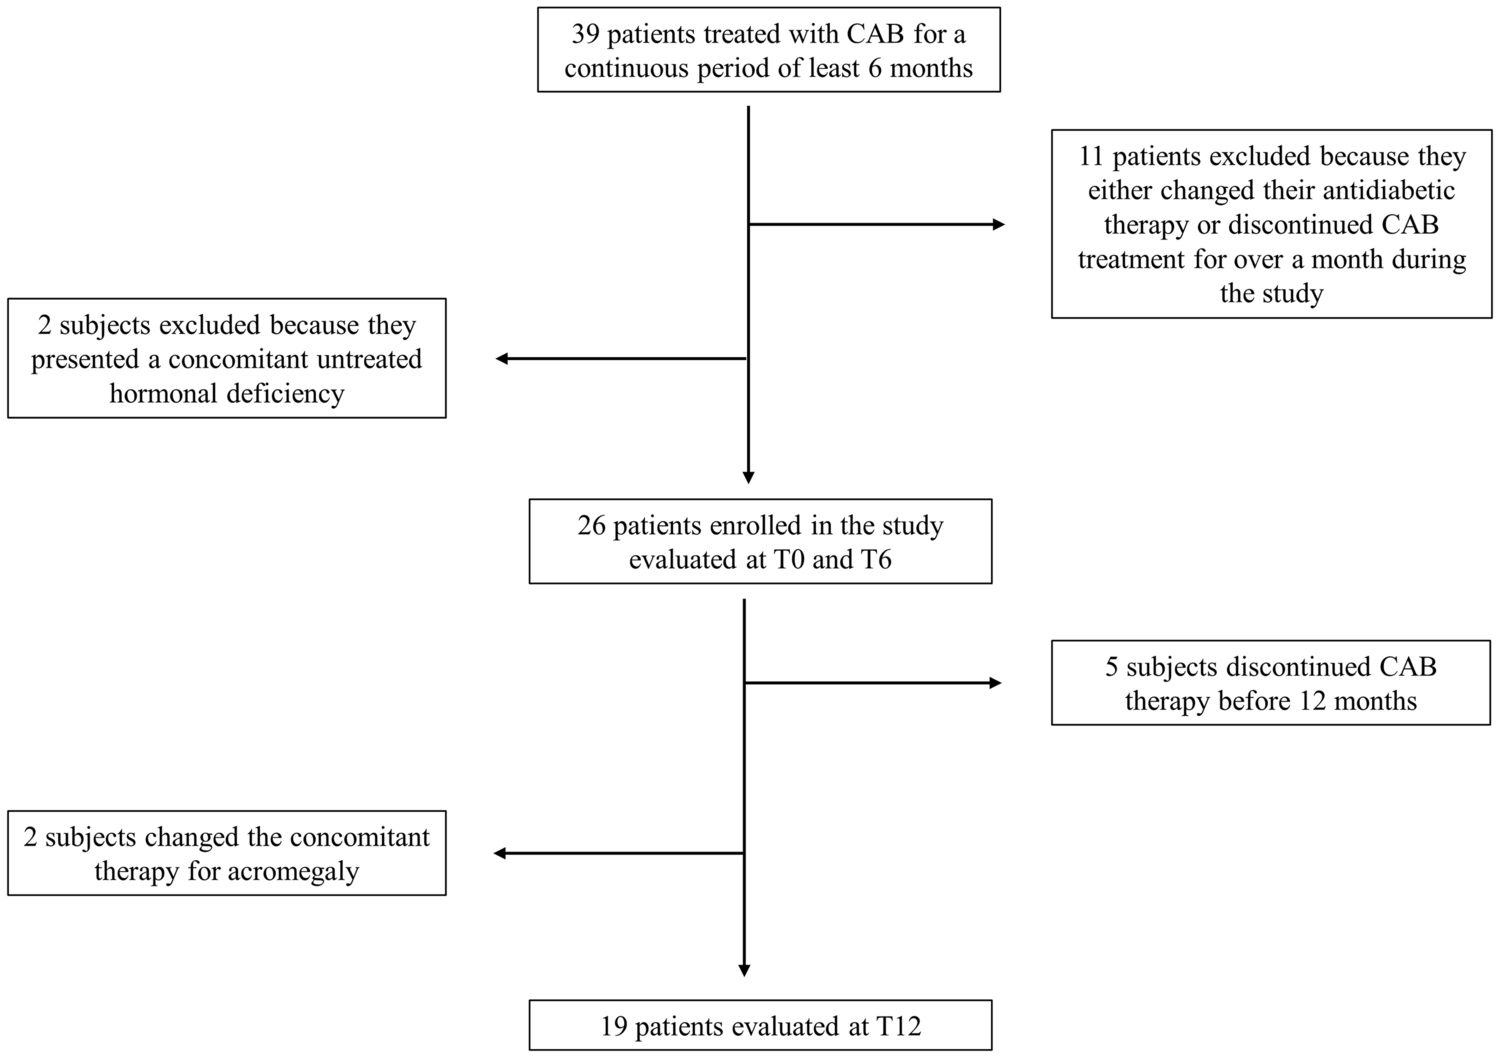 Effect of Cabergoline on weight and glucose metabolism in patients with acromegaly